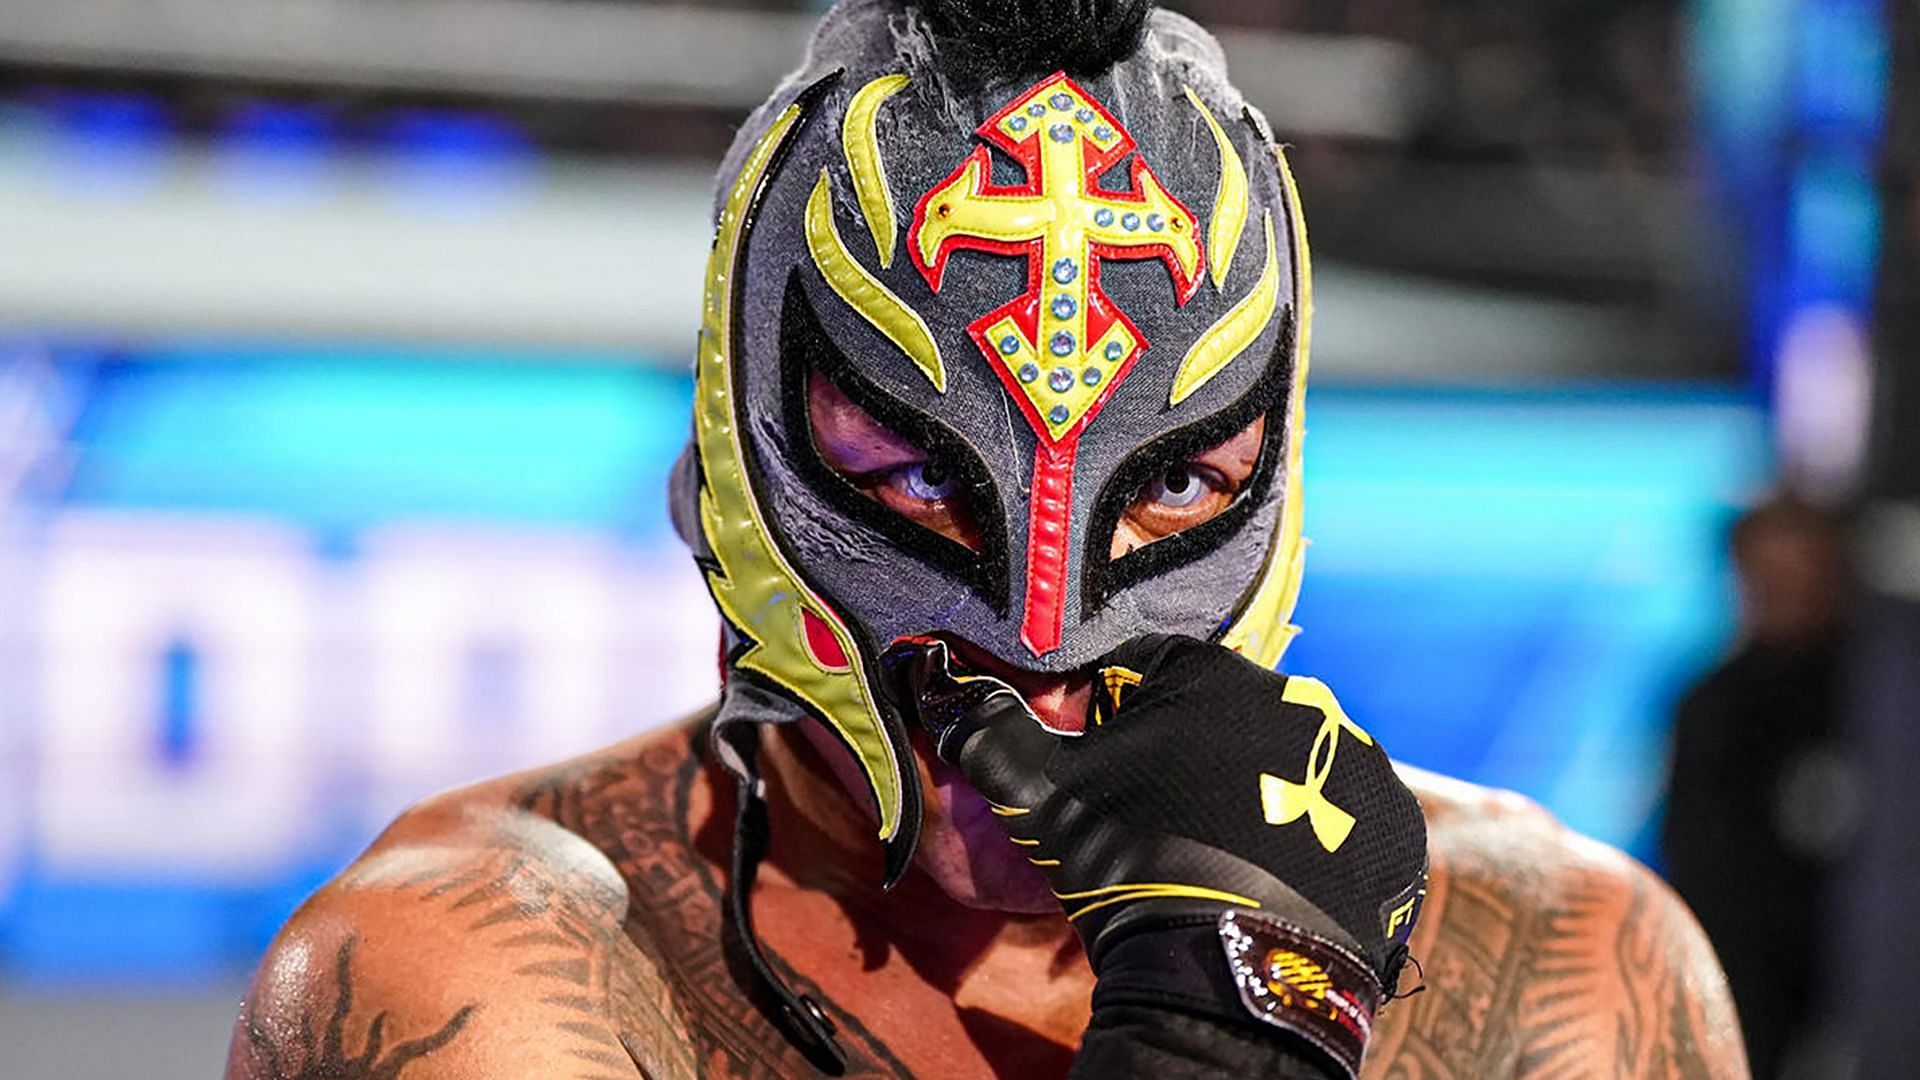 WWE Hall of Famer Rey Mysterio looks on from the stage